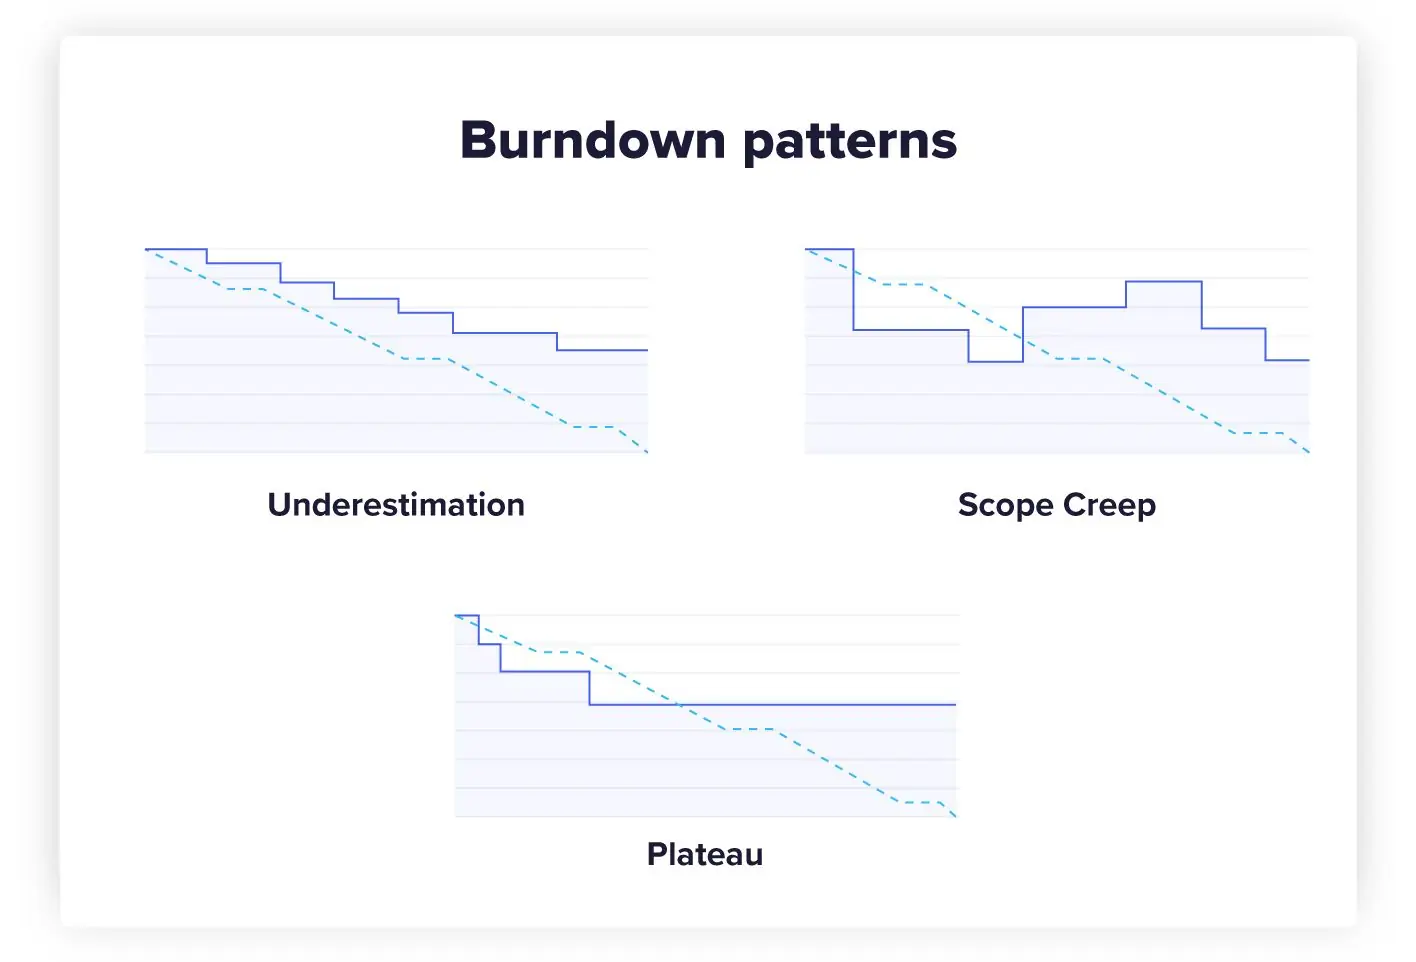 burndown chart patterns that include underestimation, scope creep, and plateau